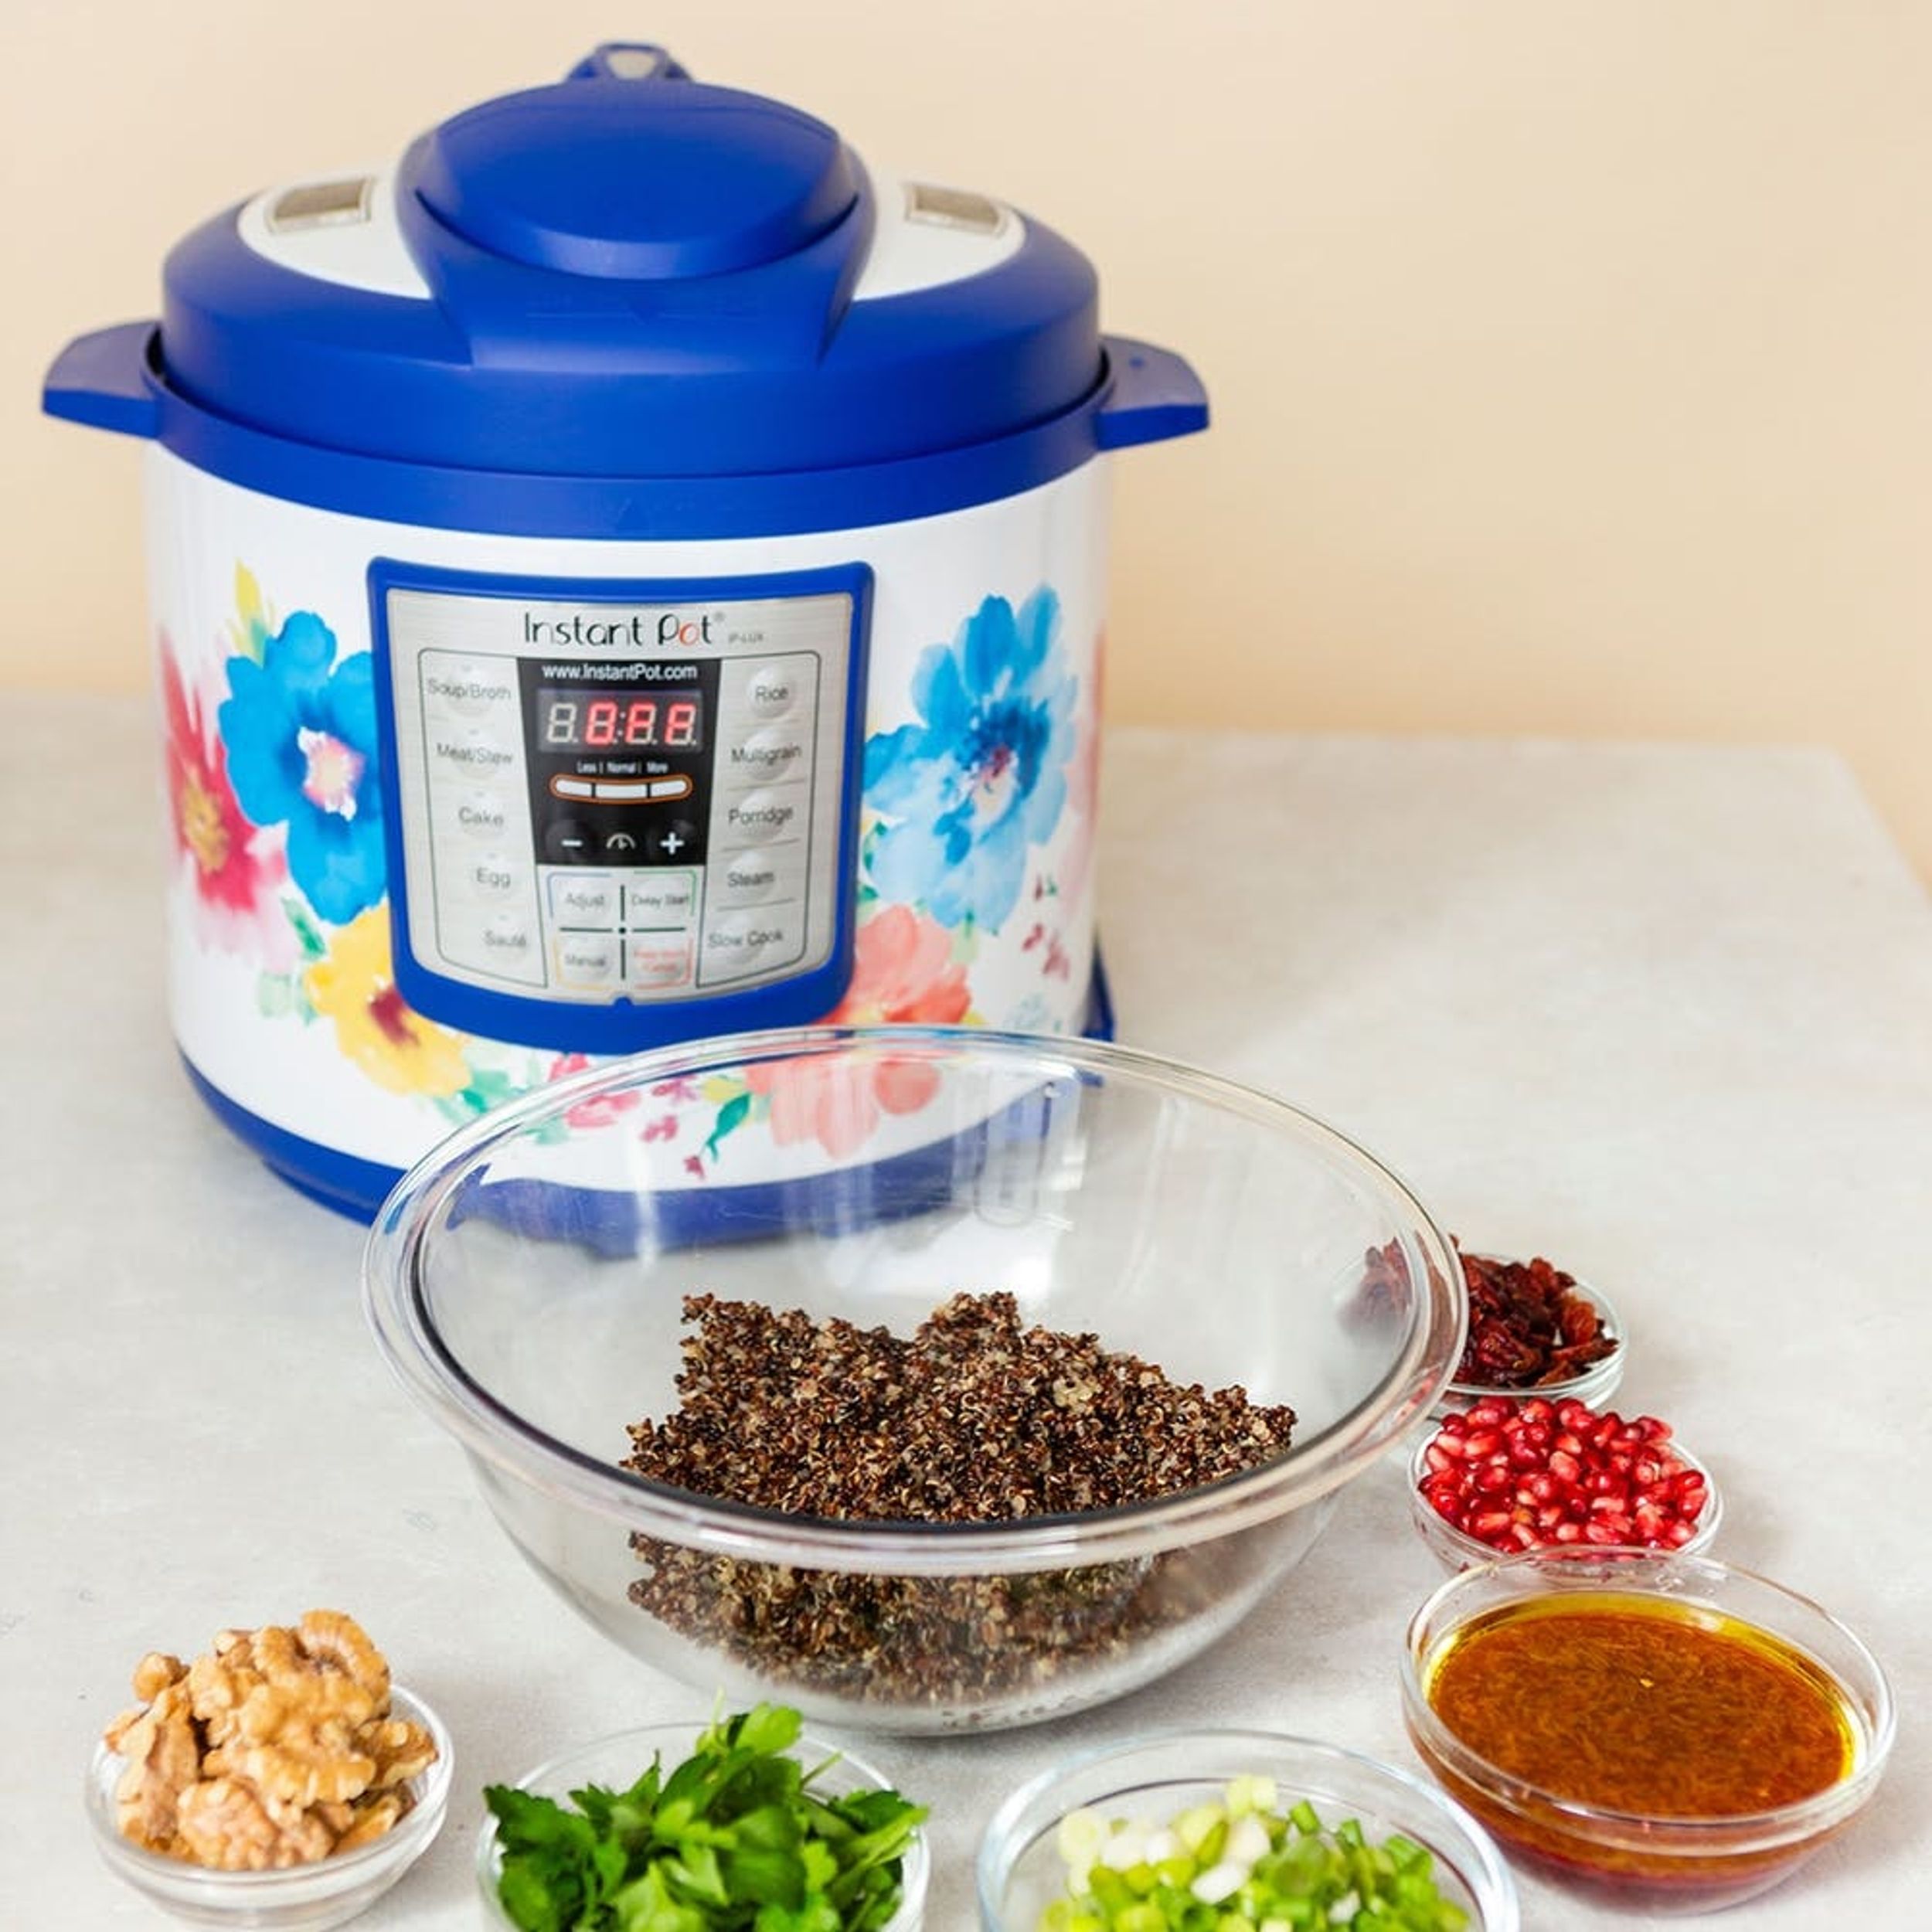 How to Pressure-Cook Quinoa in an Instant Pot So It’s Fluffy Every Time